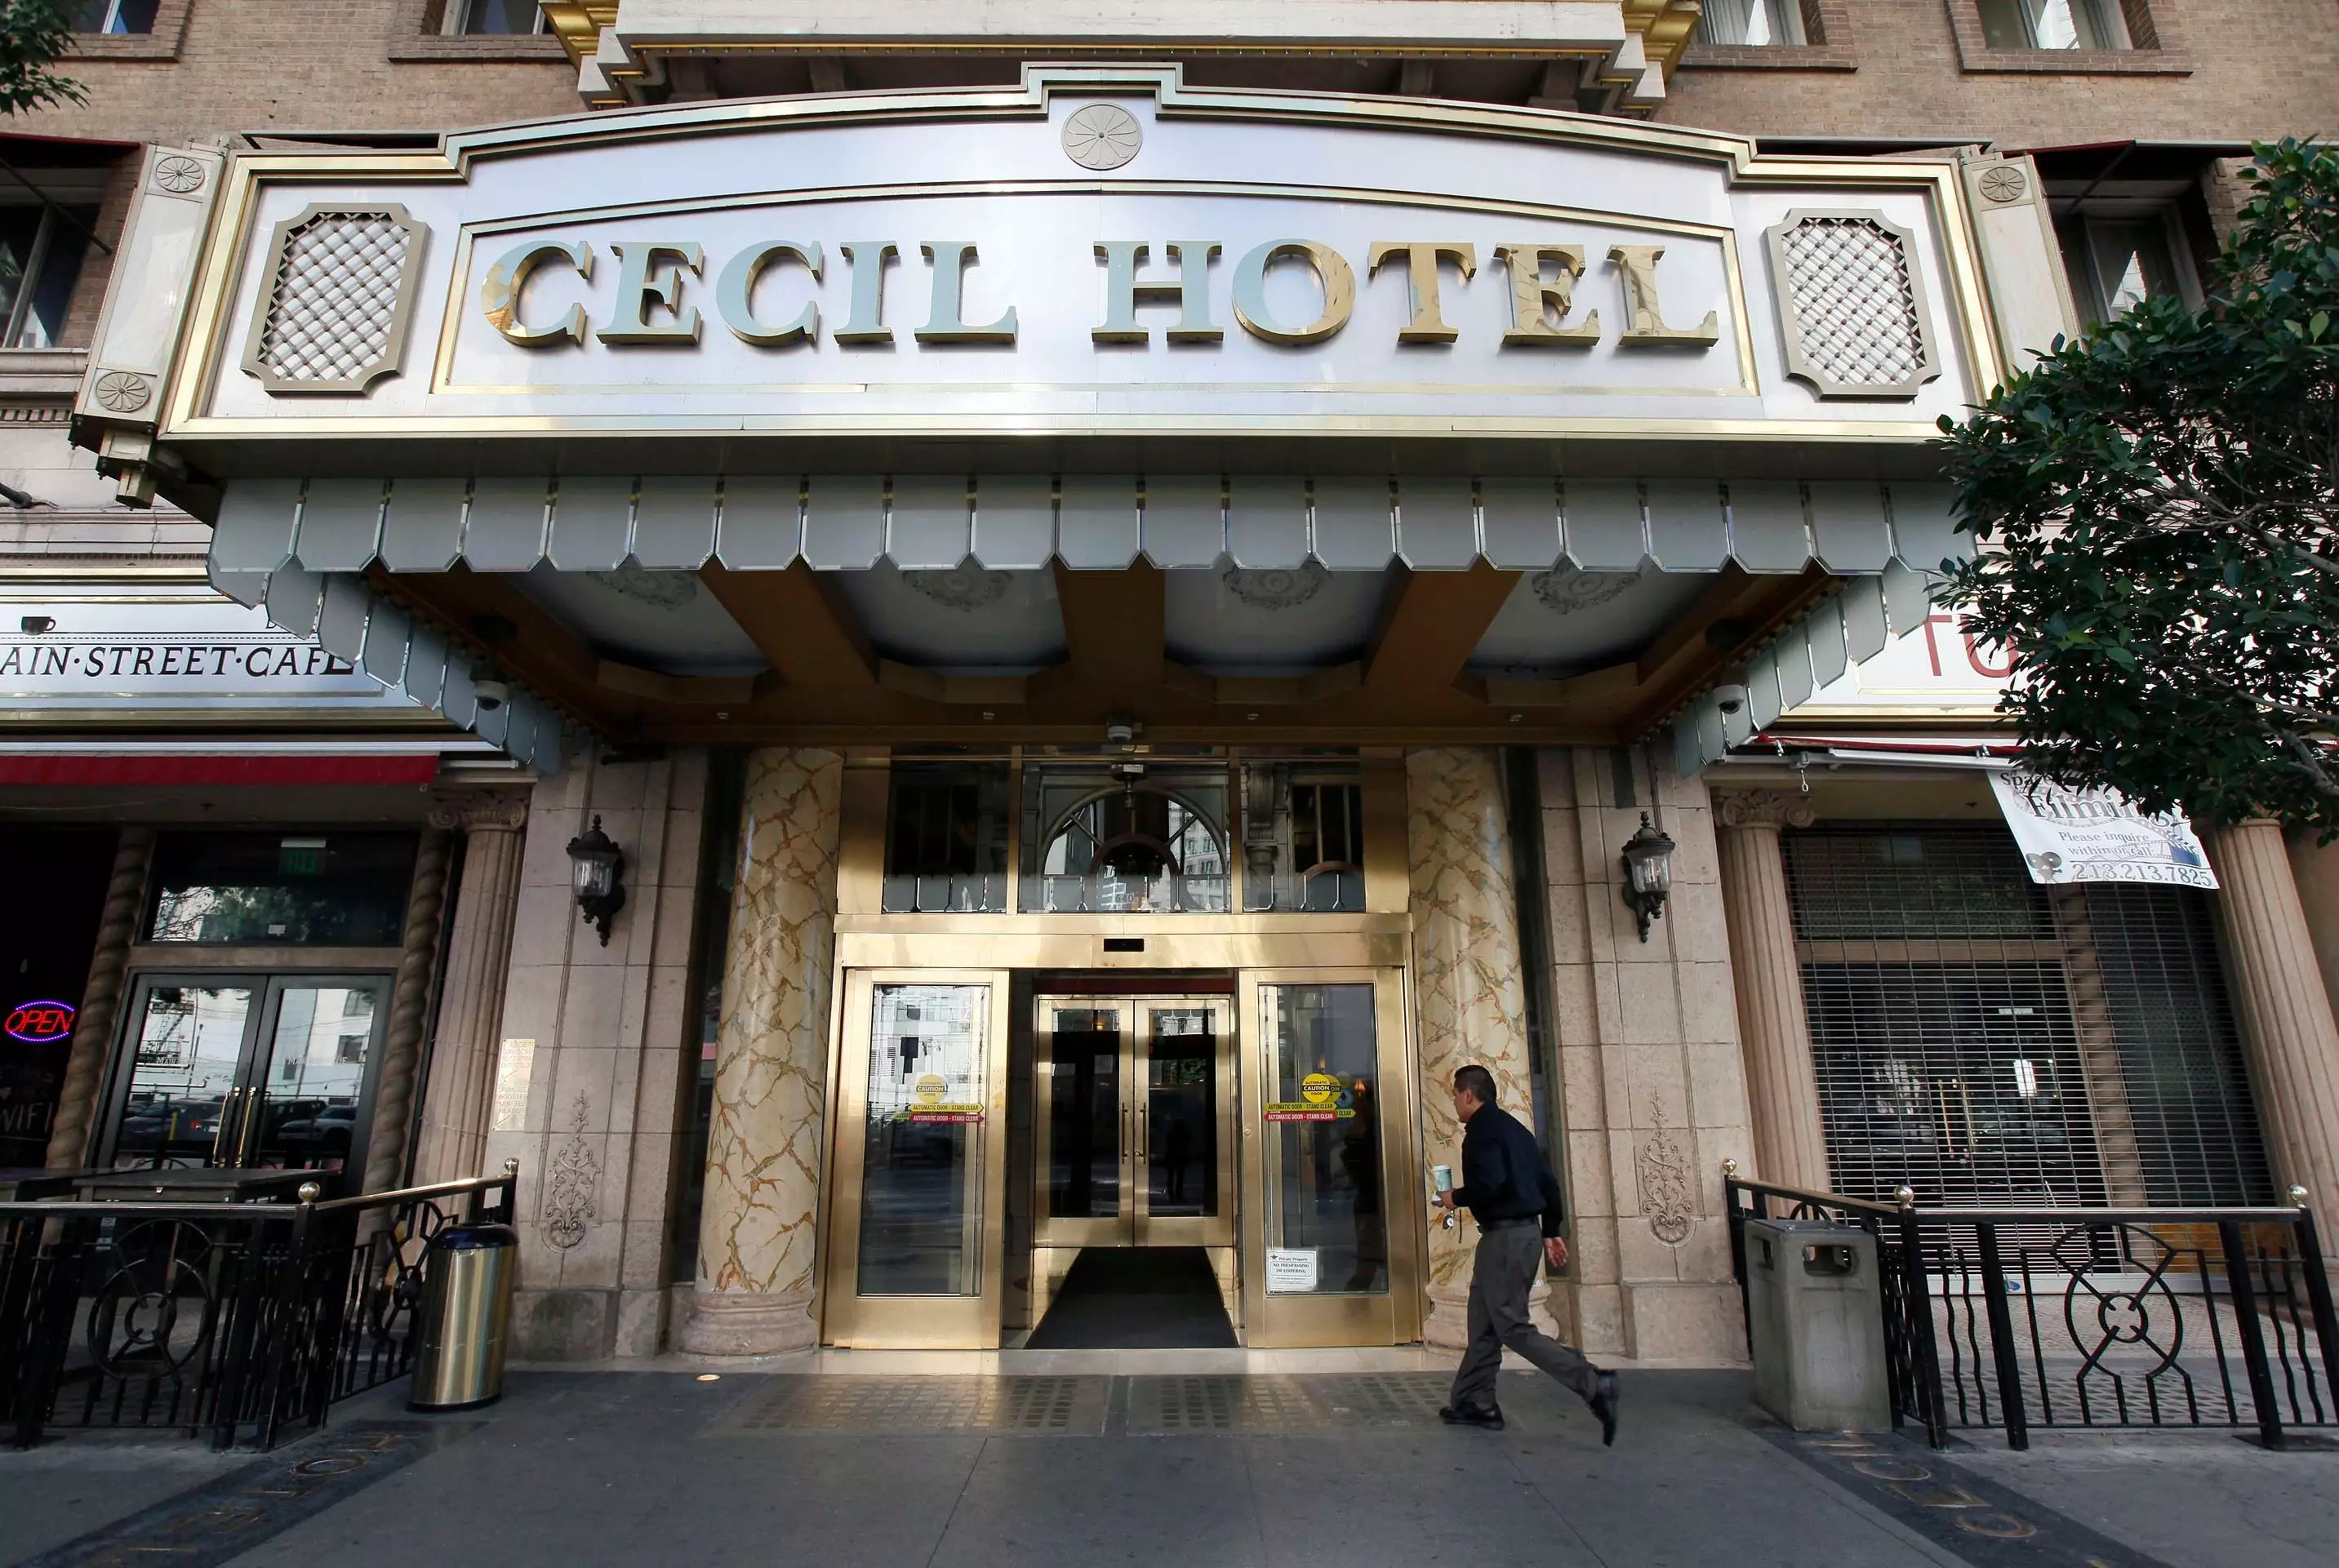 Cecil Hotel was the site of Elisa's disappearance (